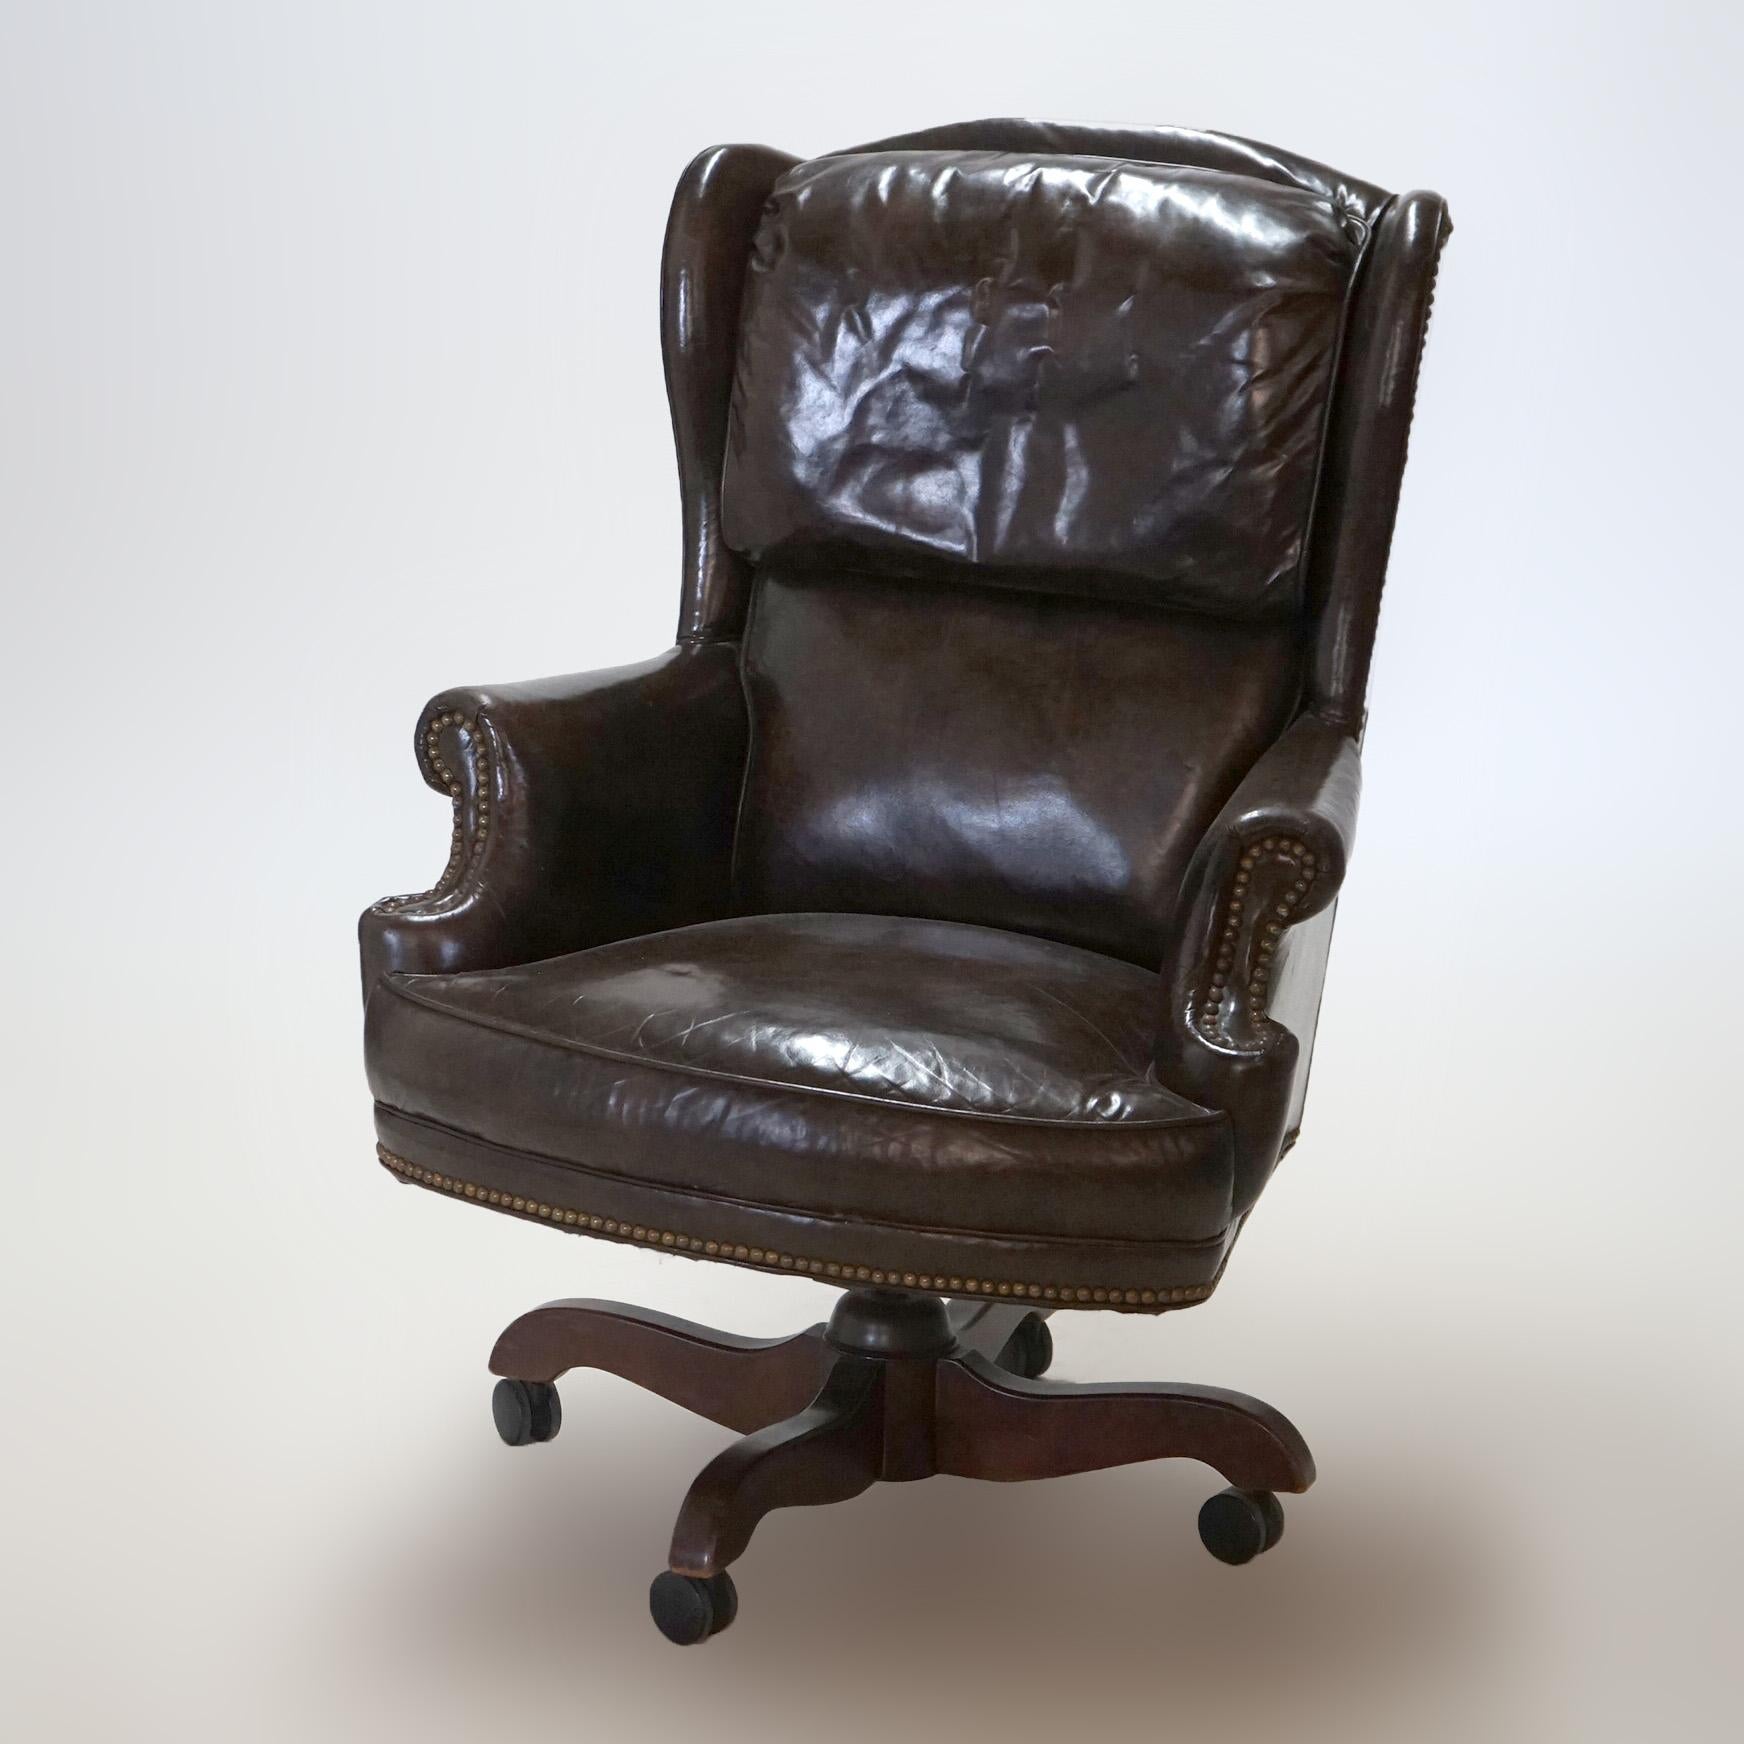 Executive Office Swivel Desk Chair, Faux Leather, 20th C

Measures- 44.5''H x 30.5''W x 33.25''D

Catalogue Note: Ask about DISCOUNTED DELIVERY RATES available to most regions within 1,500 miles of New York.